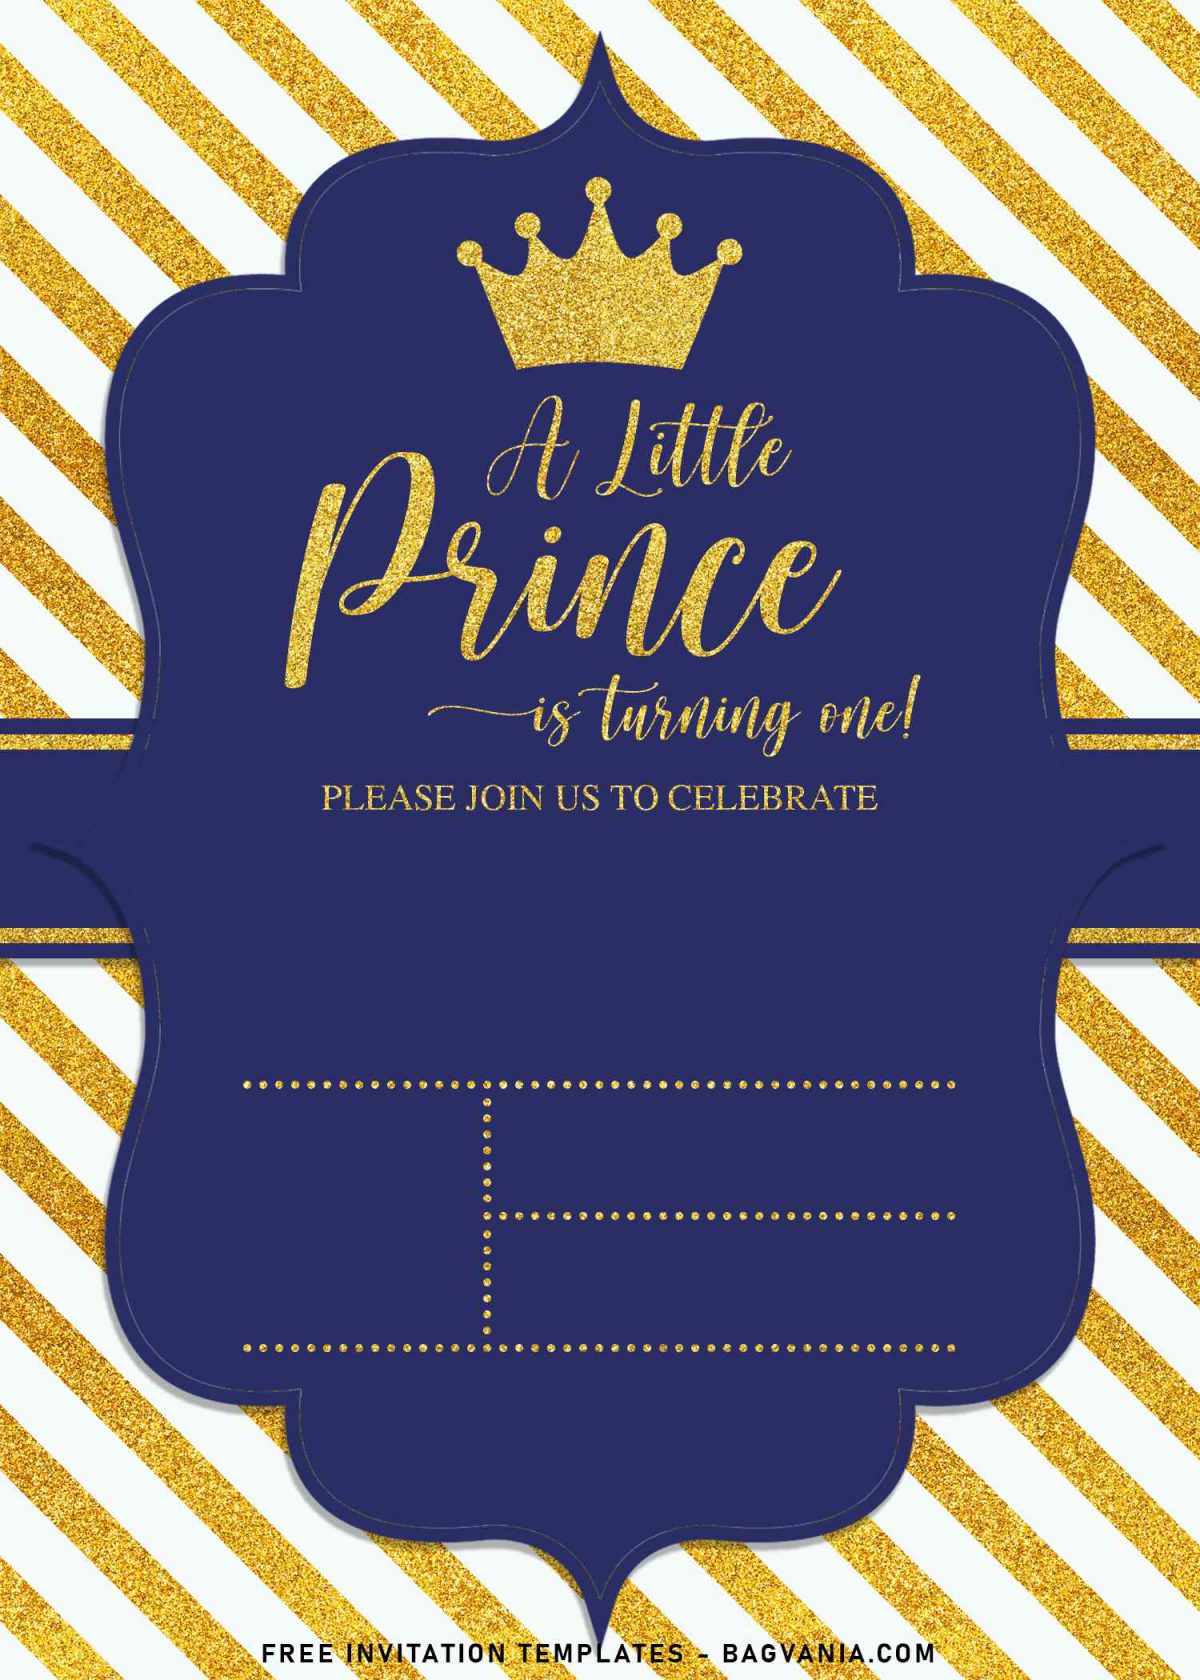 10+ Sparkling Gold Glitter Prince Birthday Invitation Templates and has A Little Prince word